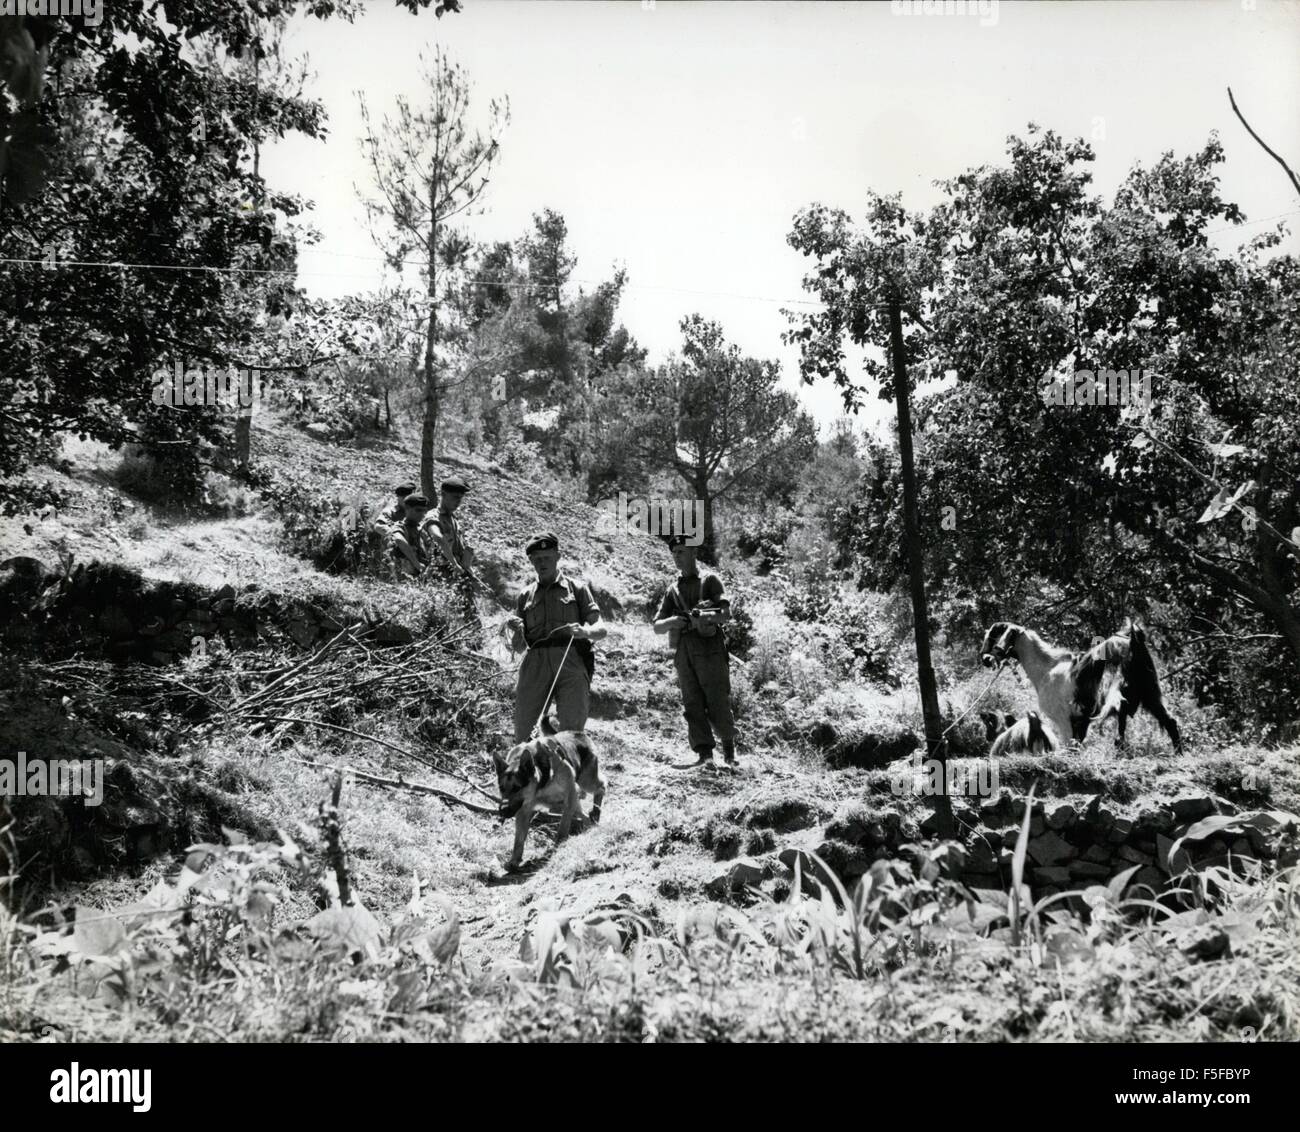 1967 - Men of the Royal Fusiliers led by a Tracker Dog ''Hornet'' make their way through ''Sspect'' territory in Cyprus. © Keystone Pictures USA/ZUMAPRESS.com/Alamy Live News Stock Photo